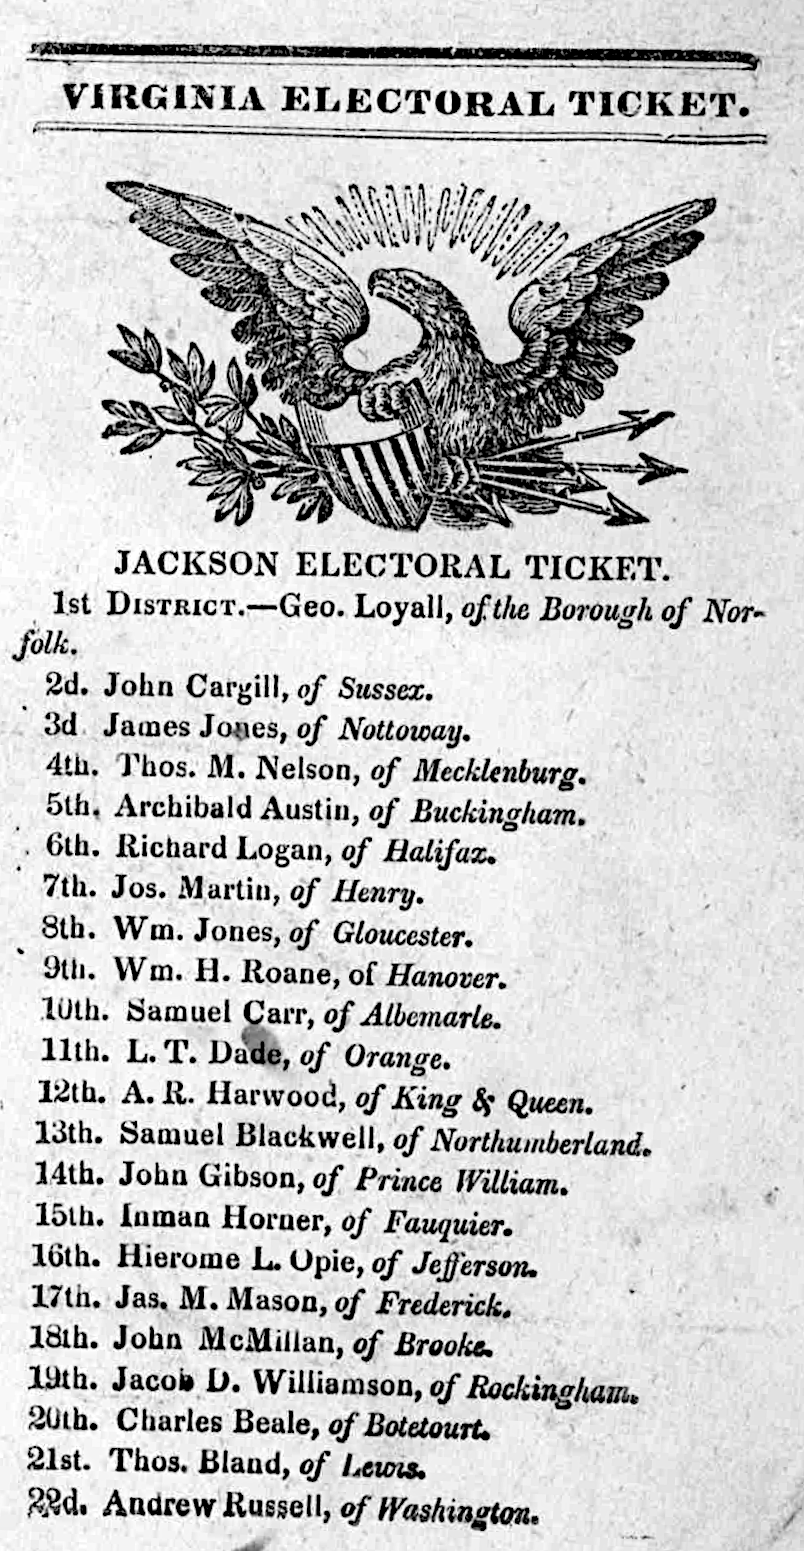 the electoral slate for Andrew Jackson in 1832 had one member from each Congressional district